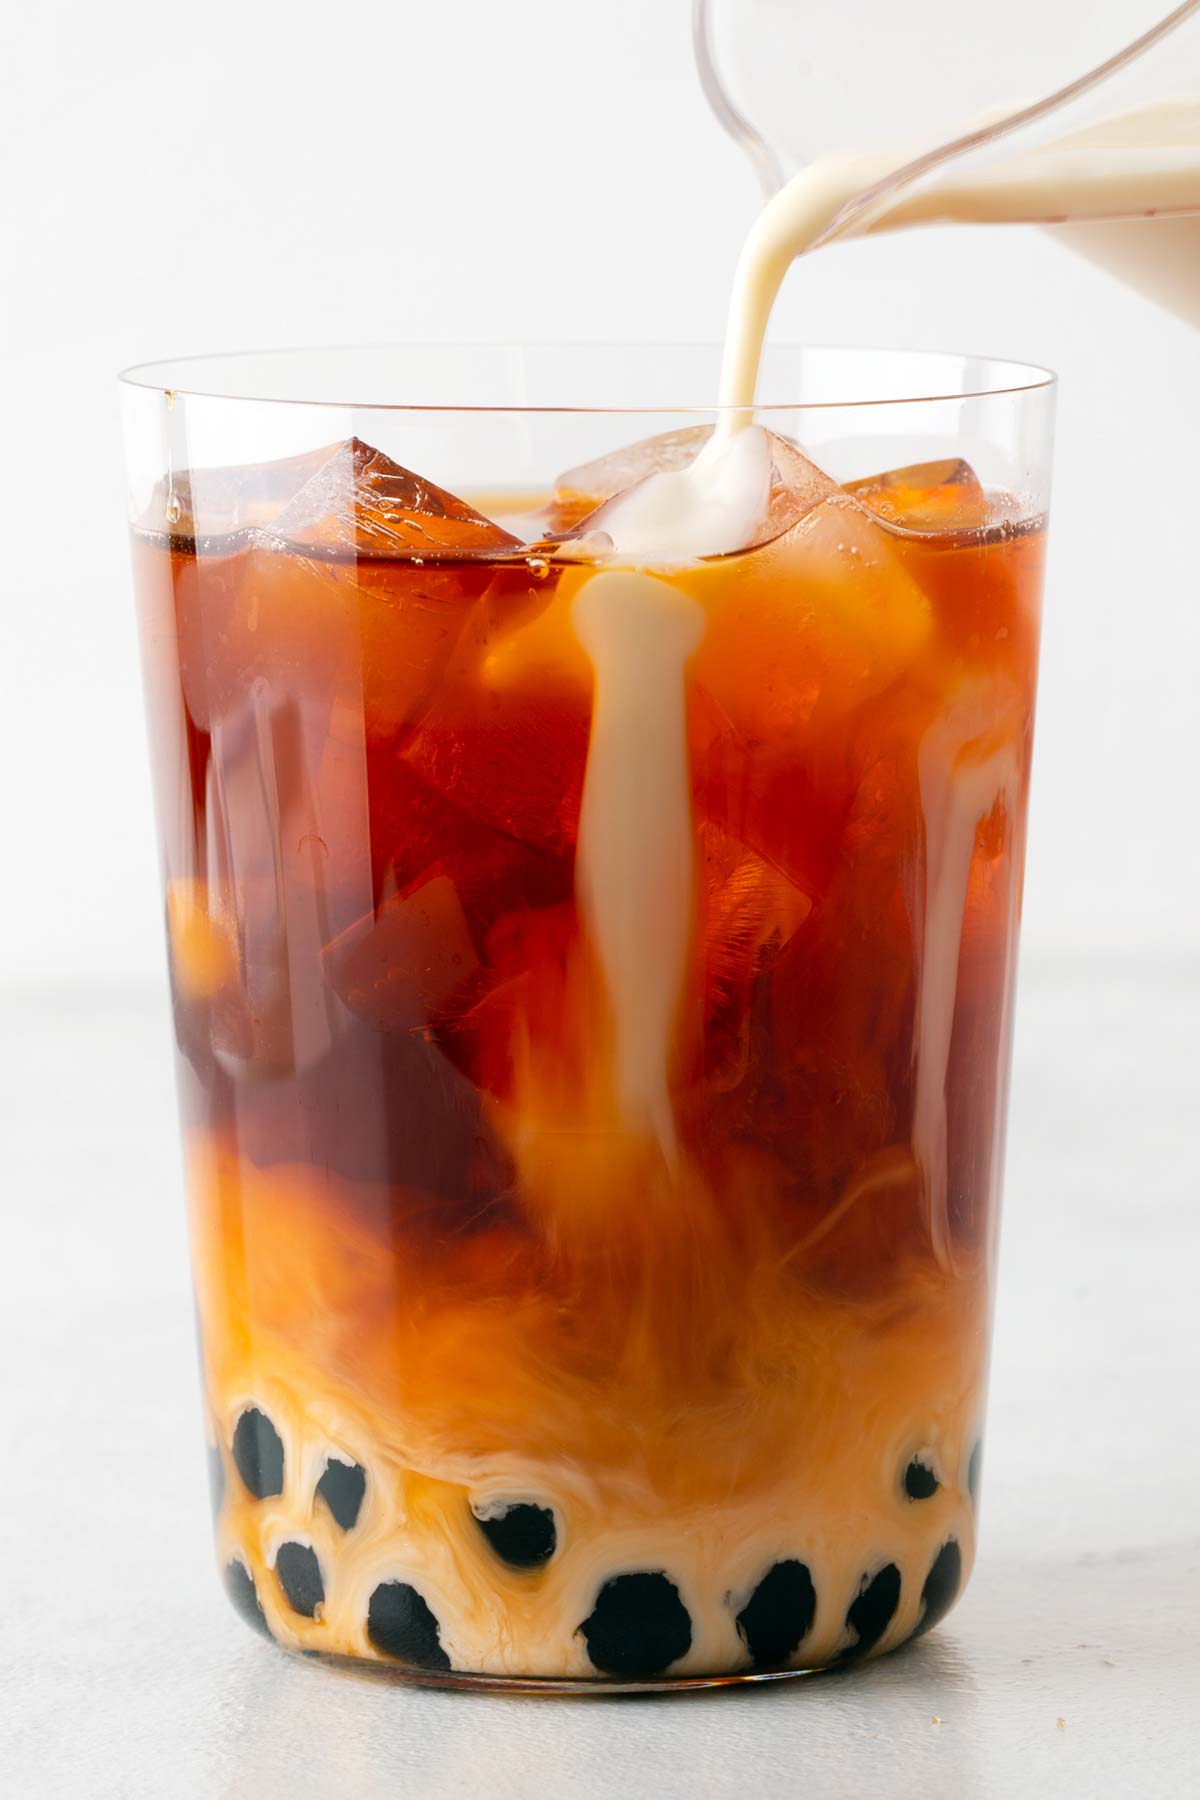 Pouring sweetened condensed milk and evaporated milk into a cup of Thai iced tea with boba.